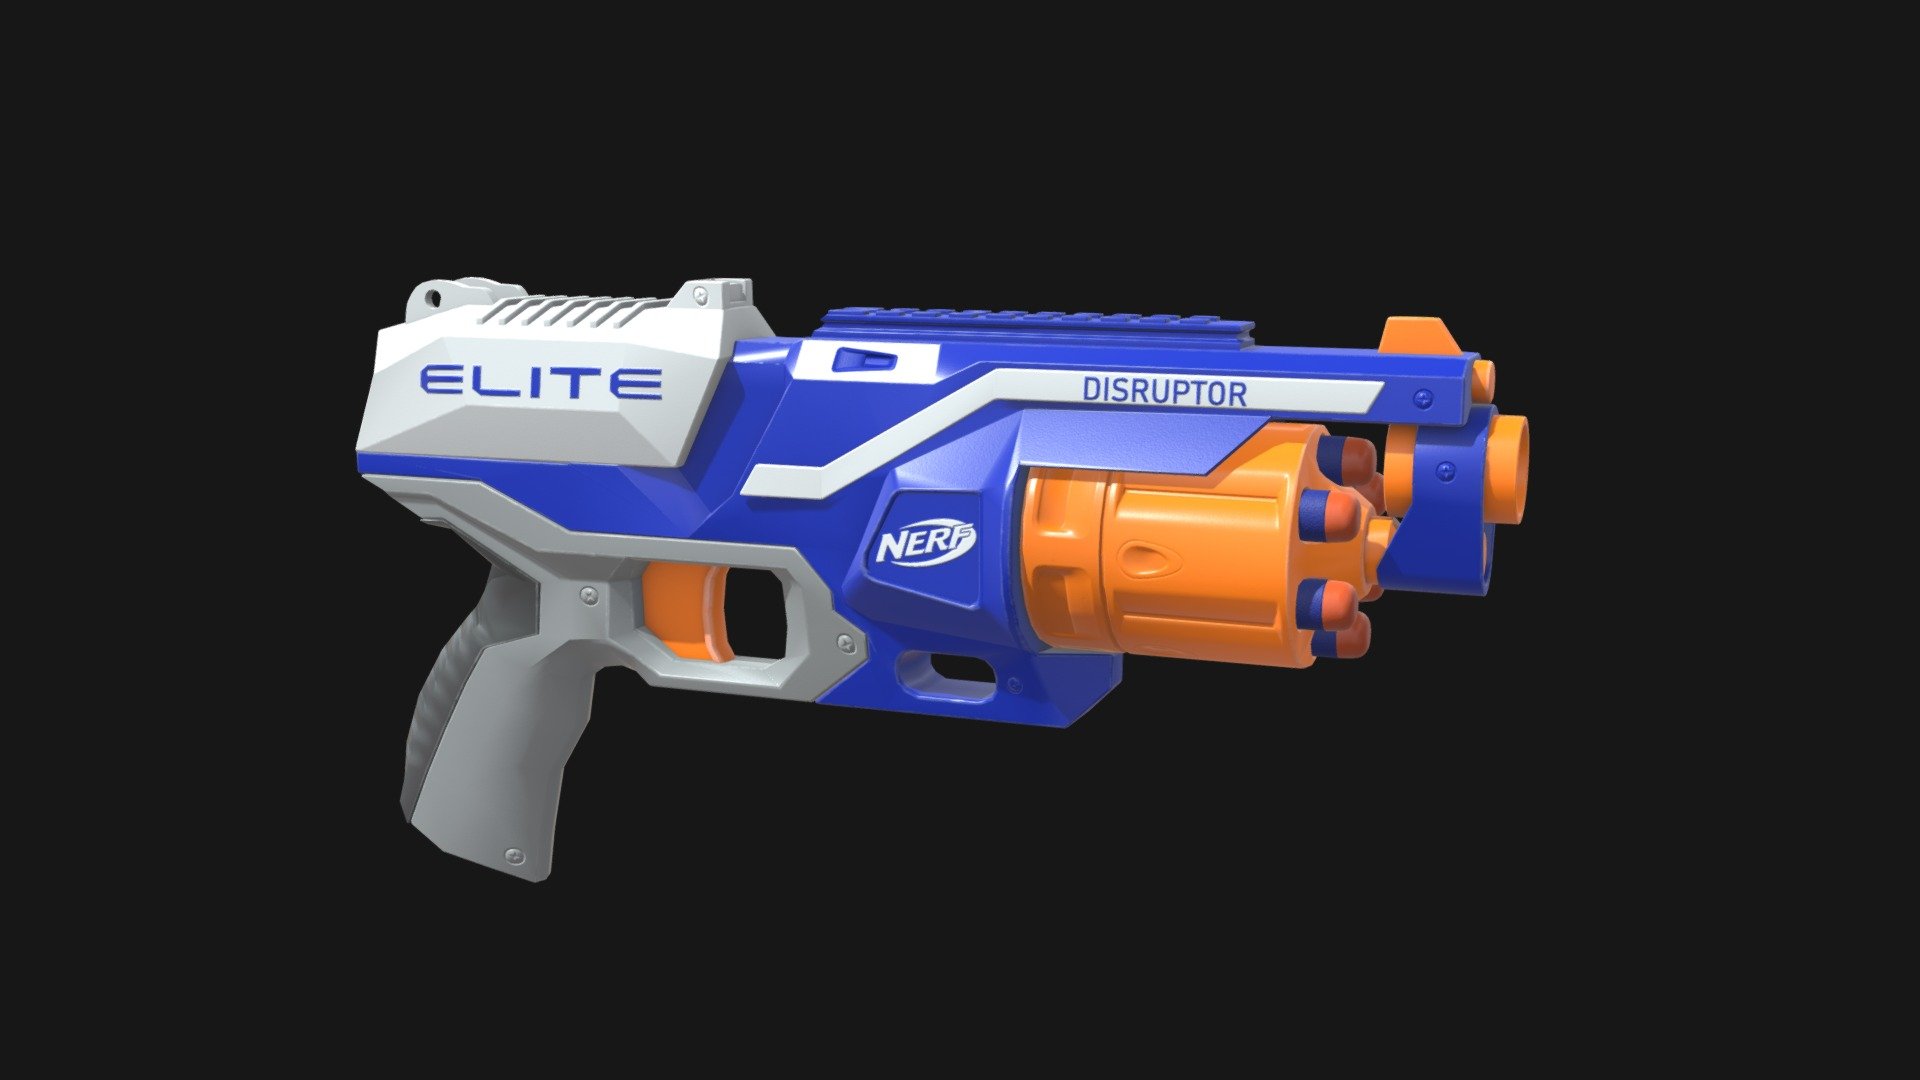 The NERF Disruptor was released in winter of 2016 as part of the N-Strike Elite series. It is a 6 shot revolver style sidearm and bears more than a passing resemblance to the hugely popular Strongarm but without the drop cylinder, instead using a front loading design.

Elite Disruptor is a trademark of Nerf 3d model